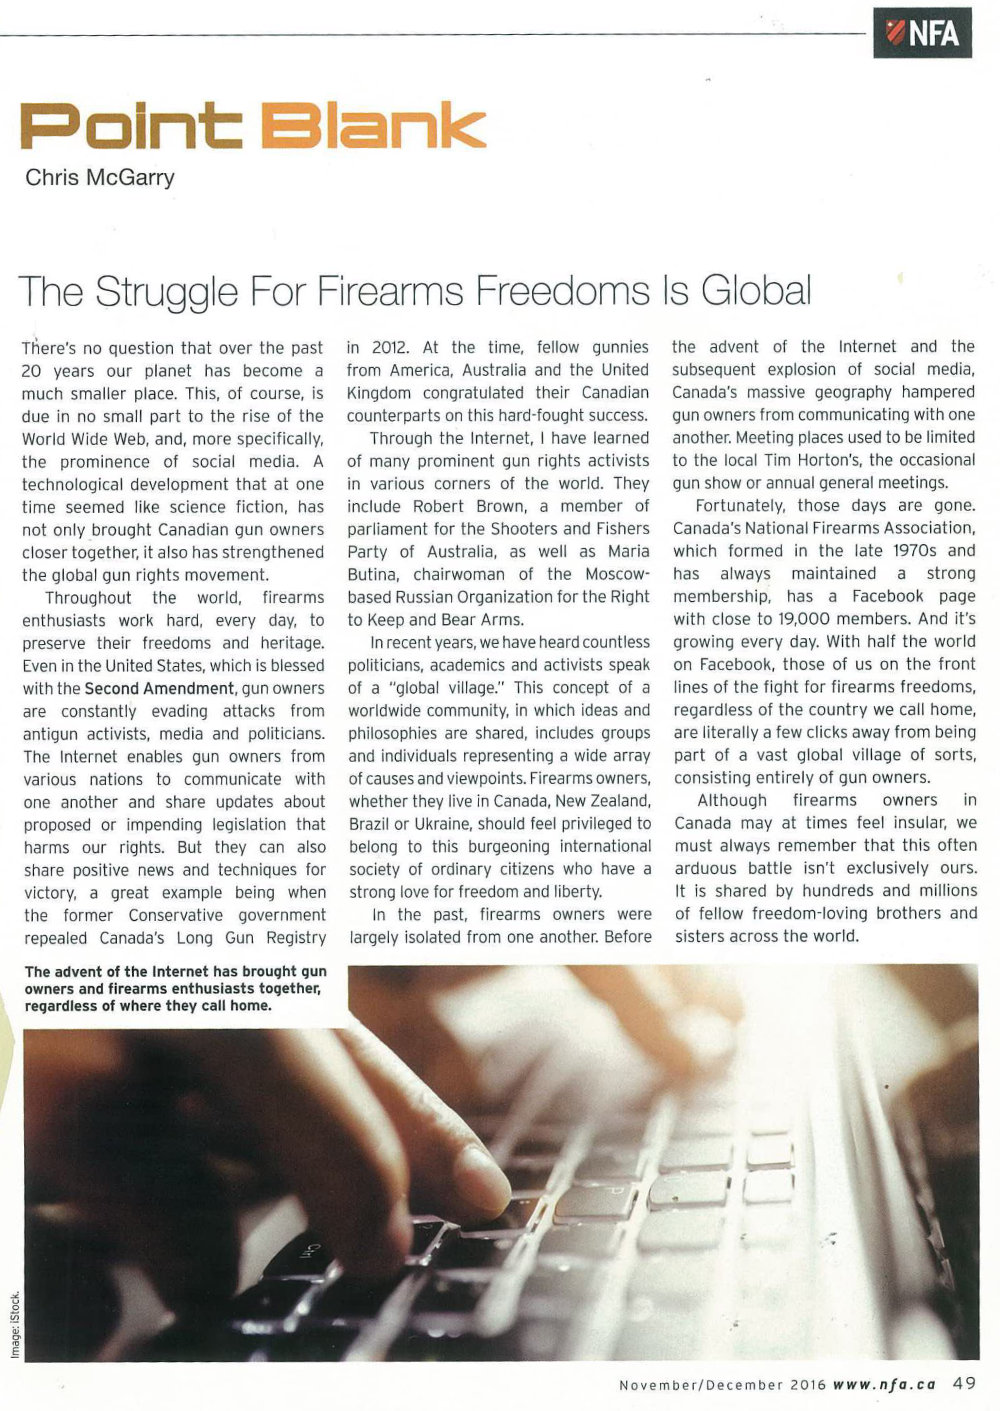 The Struggle For Firearms Freedoms Is Global